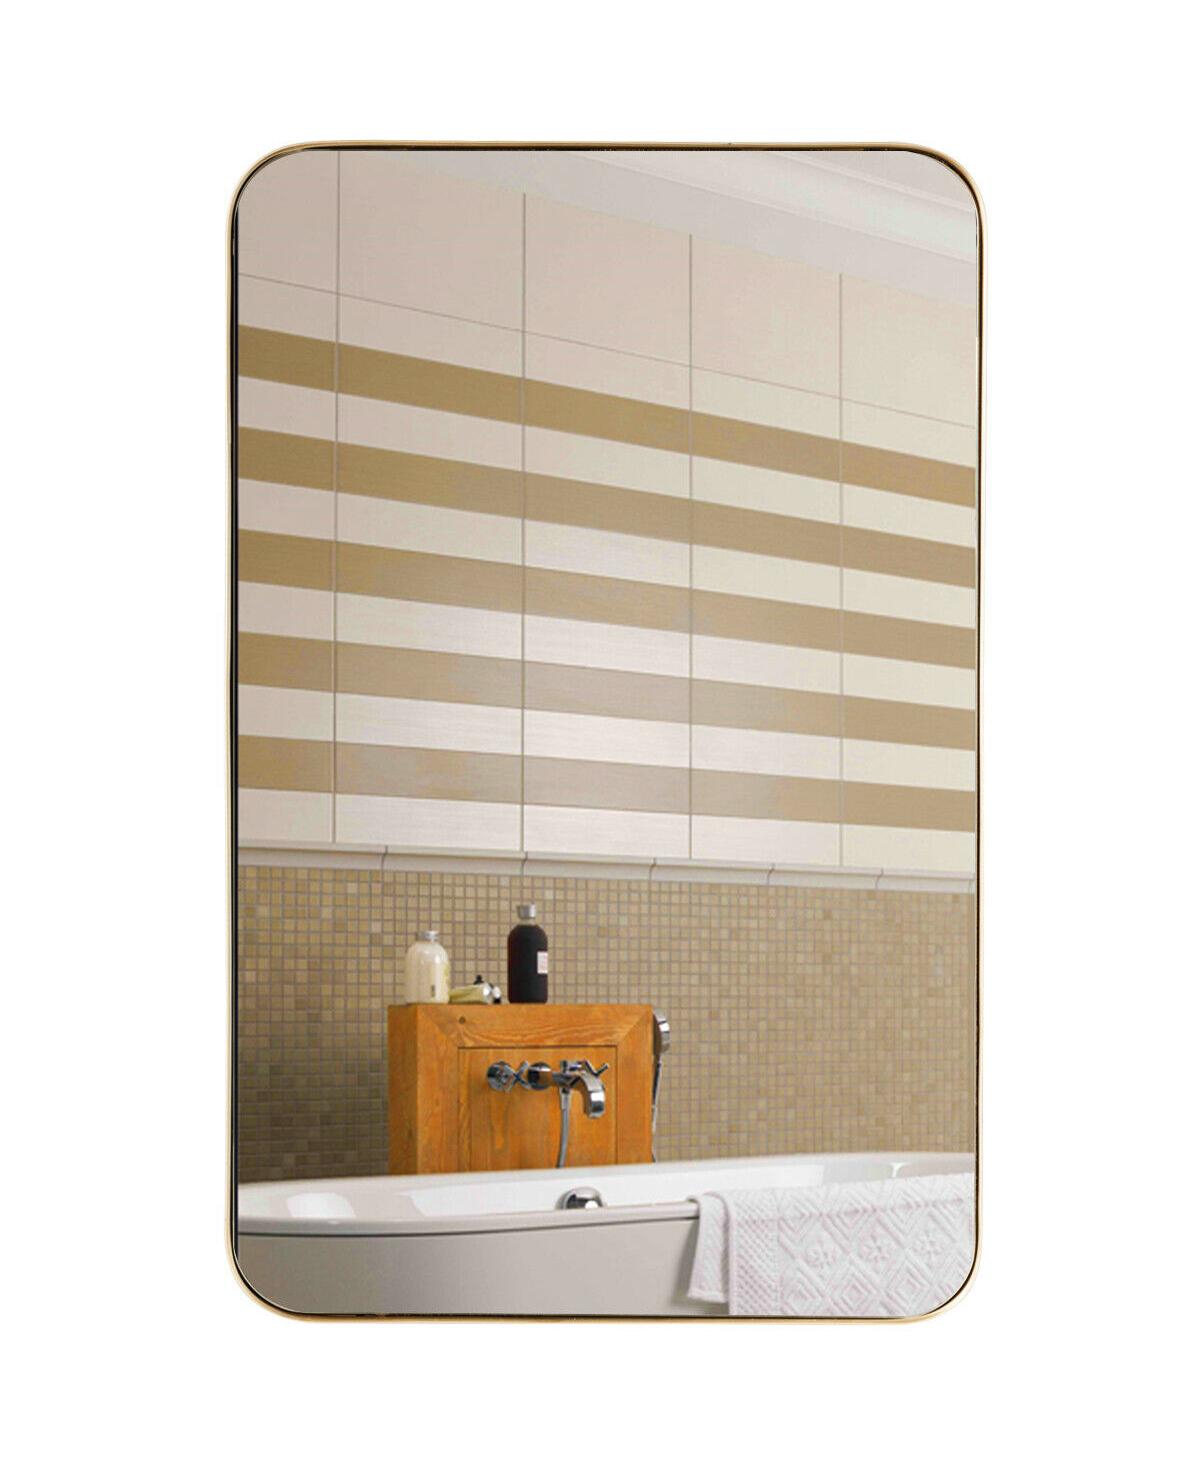 32 x 20 Inch Metal Frame Wall-Mounted Rectangle Mirror - Gold